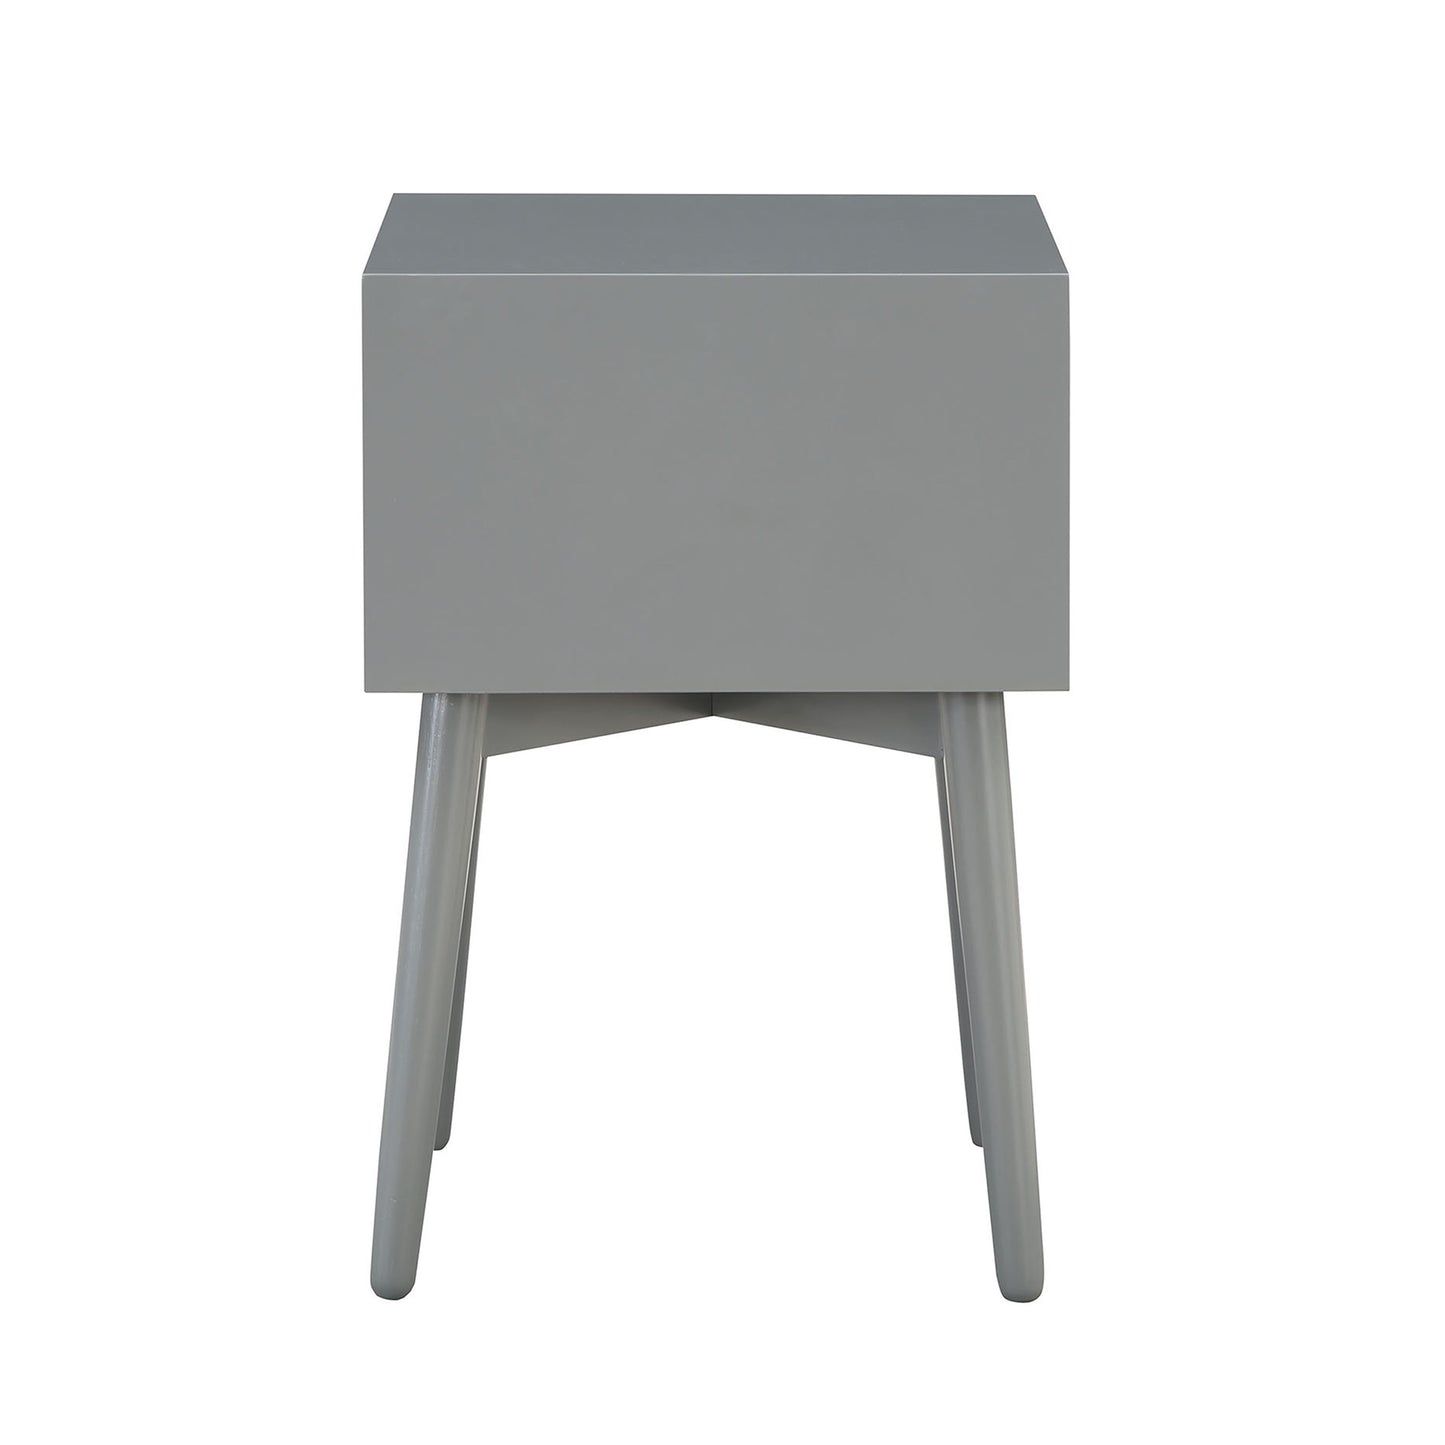 Front-facing side view of a modern gray two-drawer compact nightstand with splayed legs on a white background